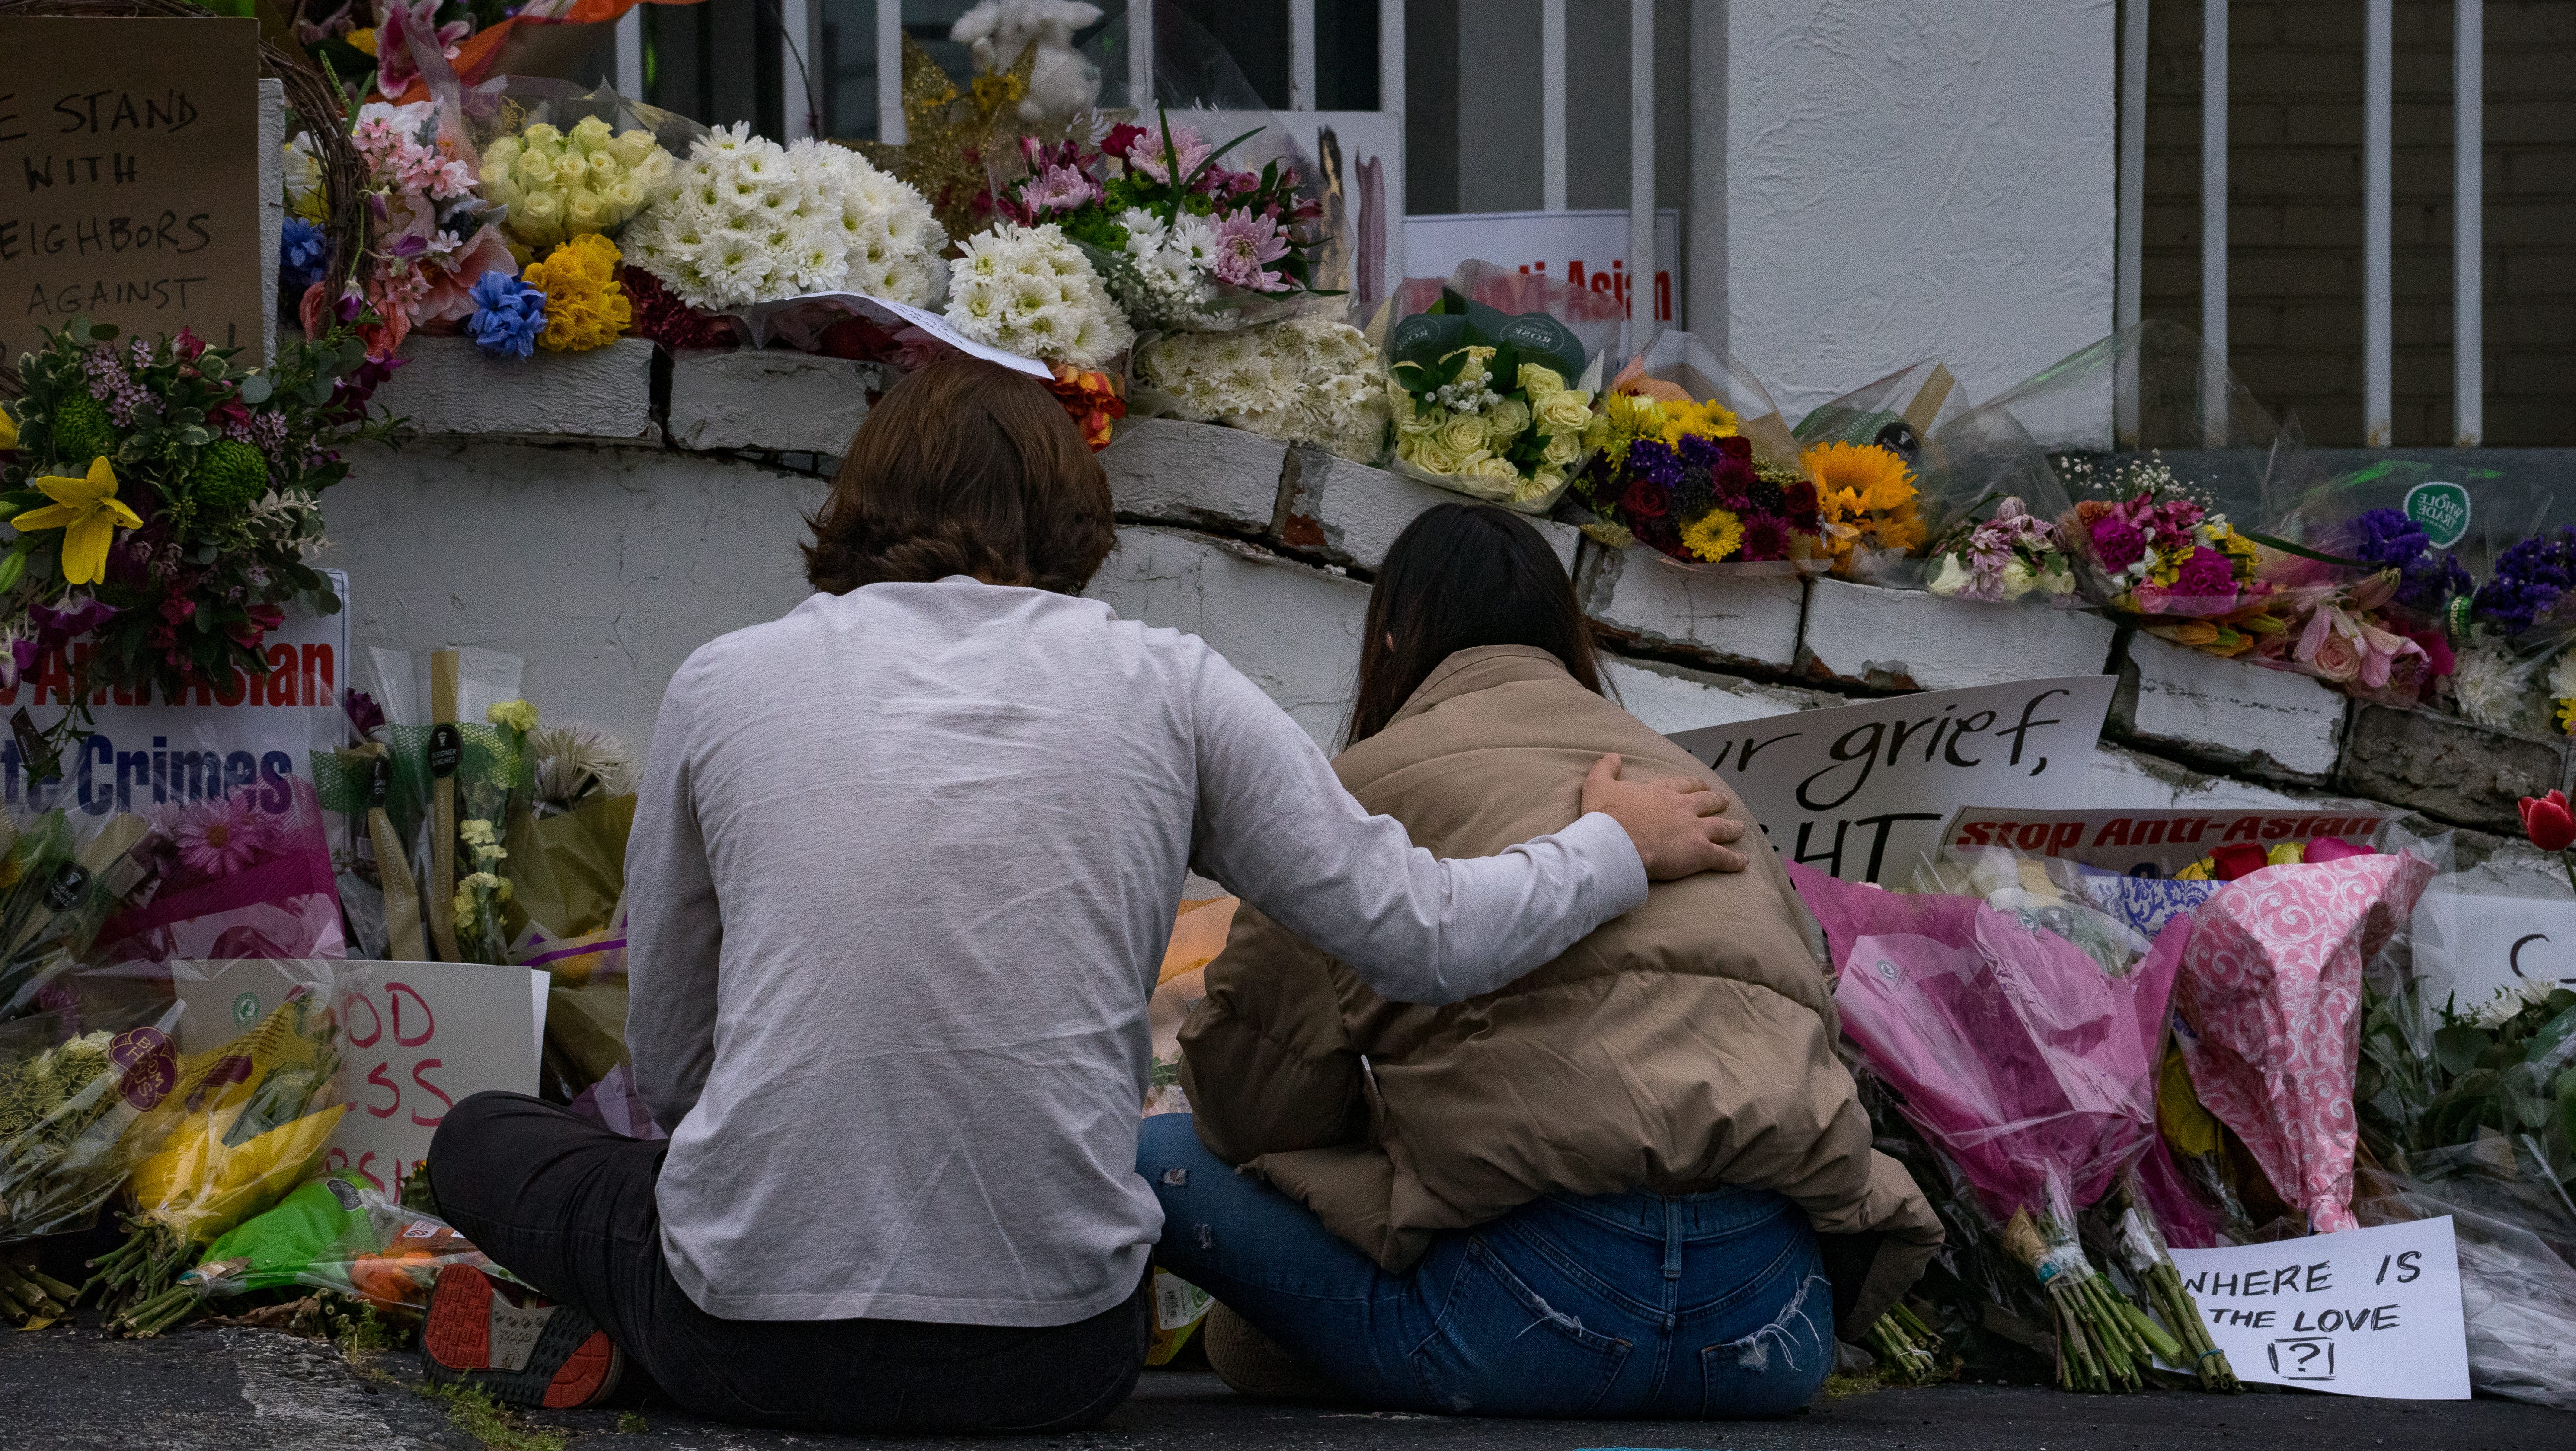 People bring flowers to the memorial sight set up outside of The Gold Spa on March 19, 2021 in Atlanta, Georgia.